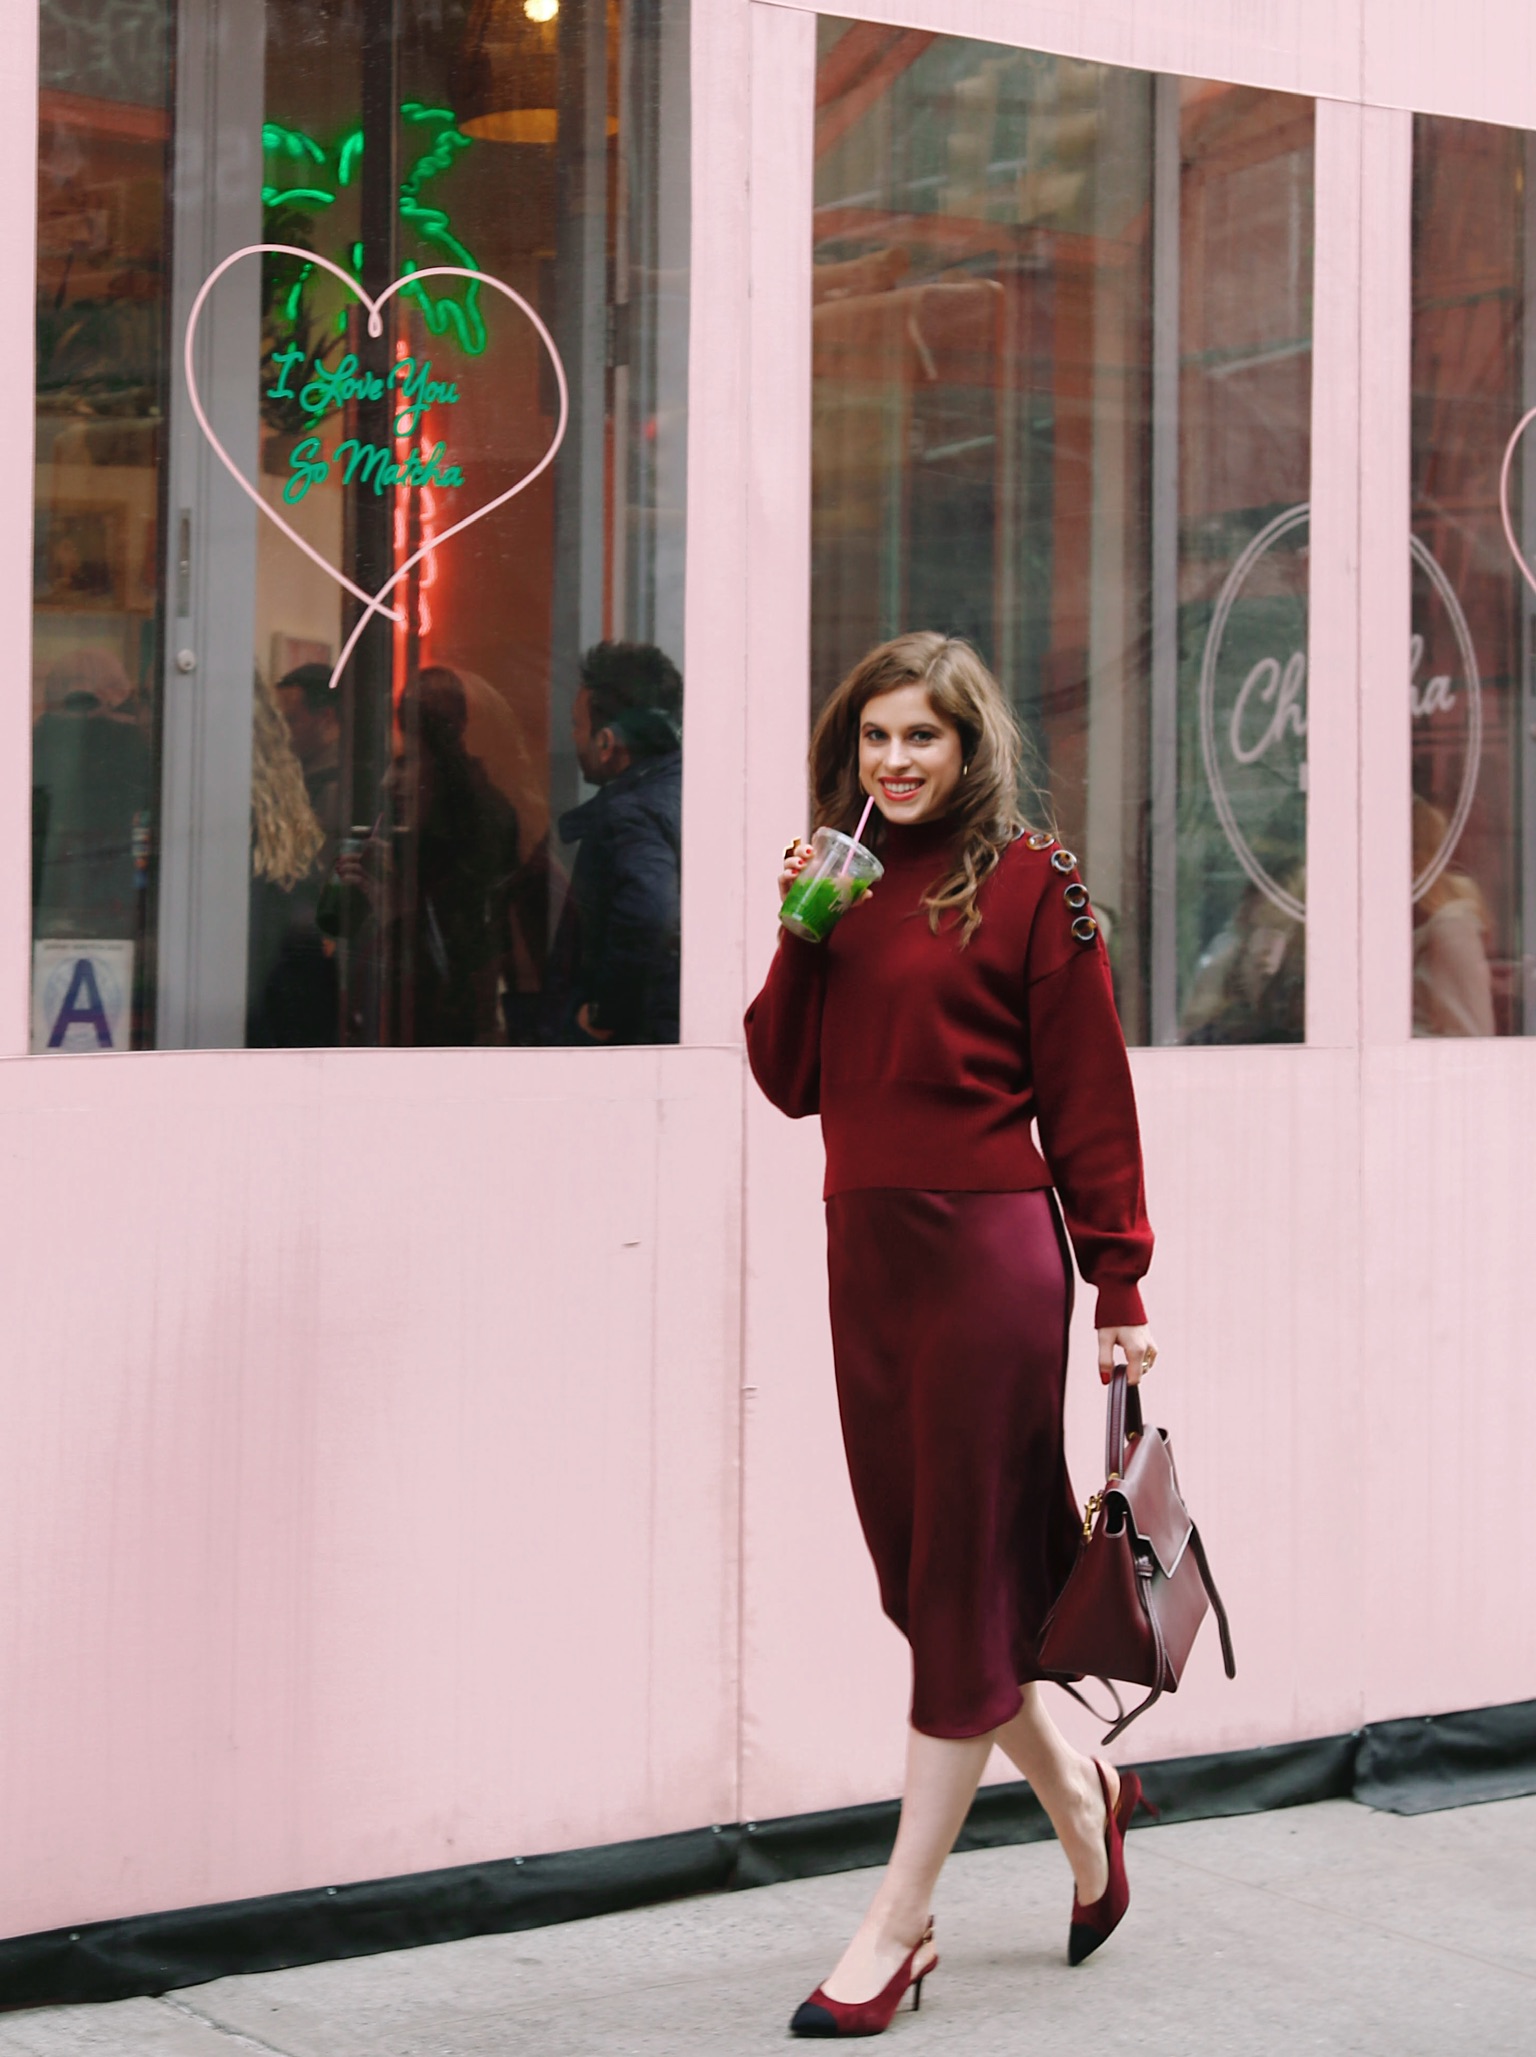 Woman in front of Cha Cha Matcha drinking a matcha drink wearing a crimson monochrome outfit: sweater, handbag, shoes & skirt